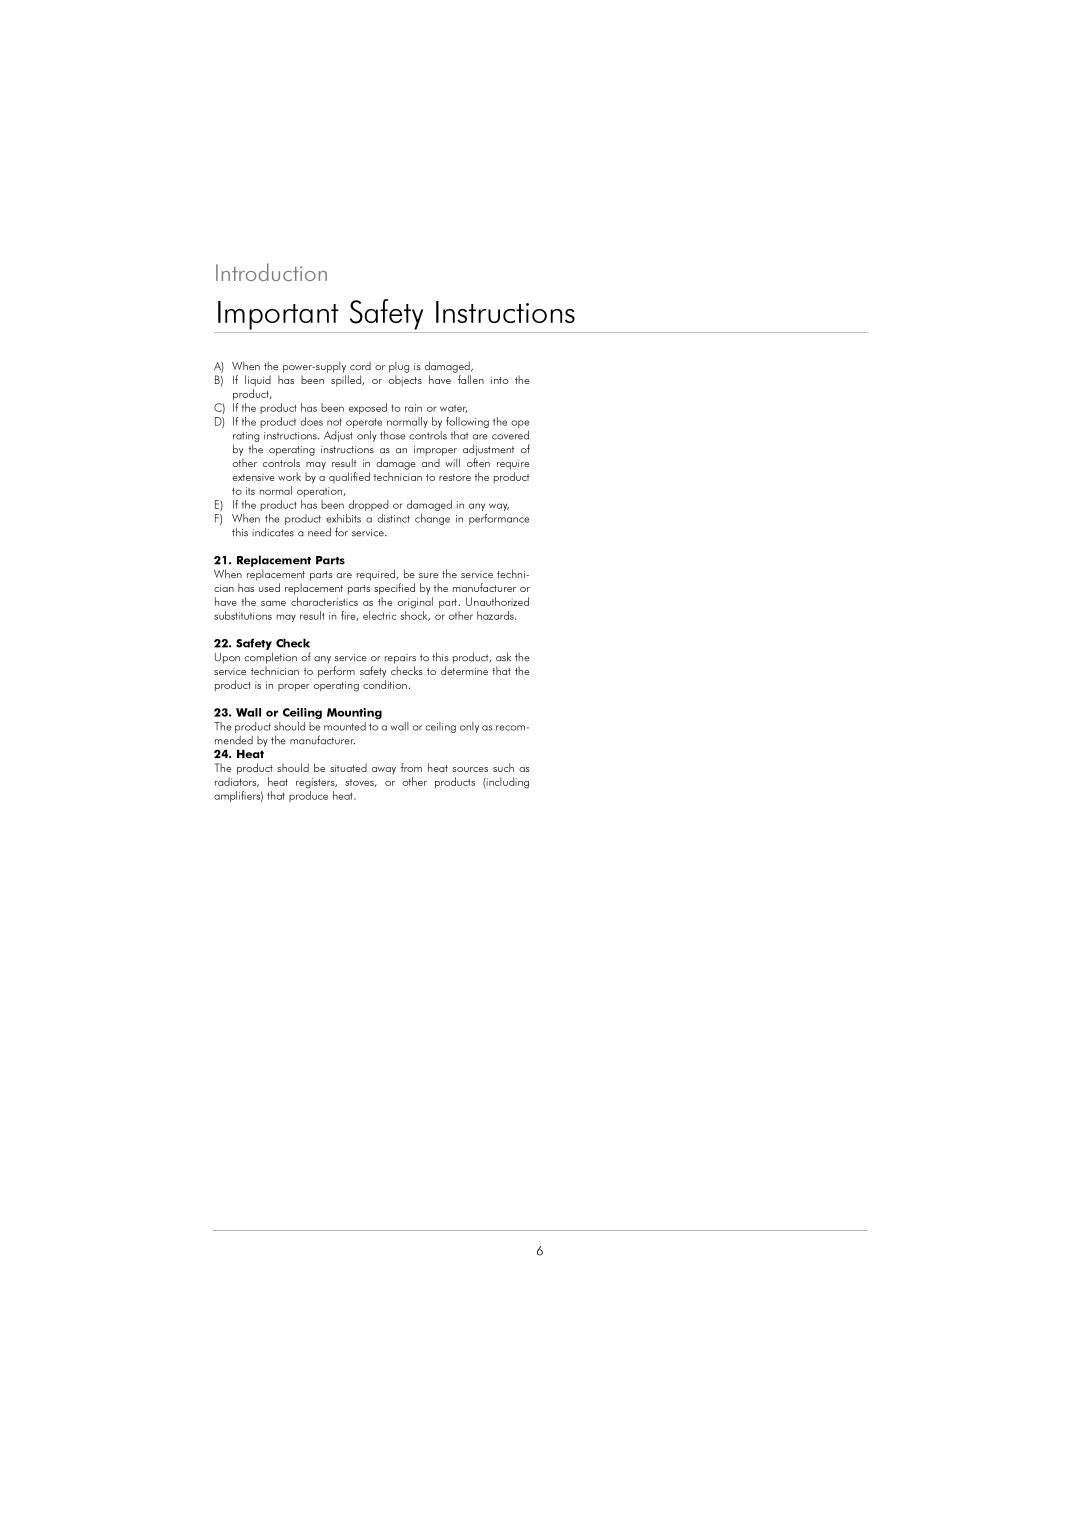 Kodak DVD 40 Important Safety Instructions, Introduction, Replacement Parts, Safety Check, Wall or Ceiling Mounting, Heat 